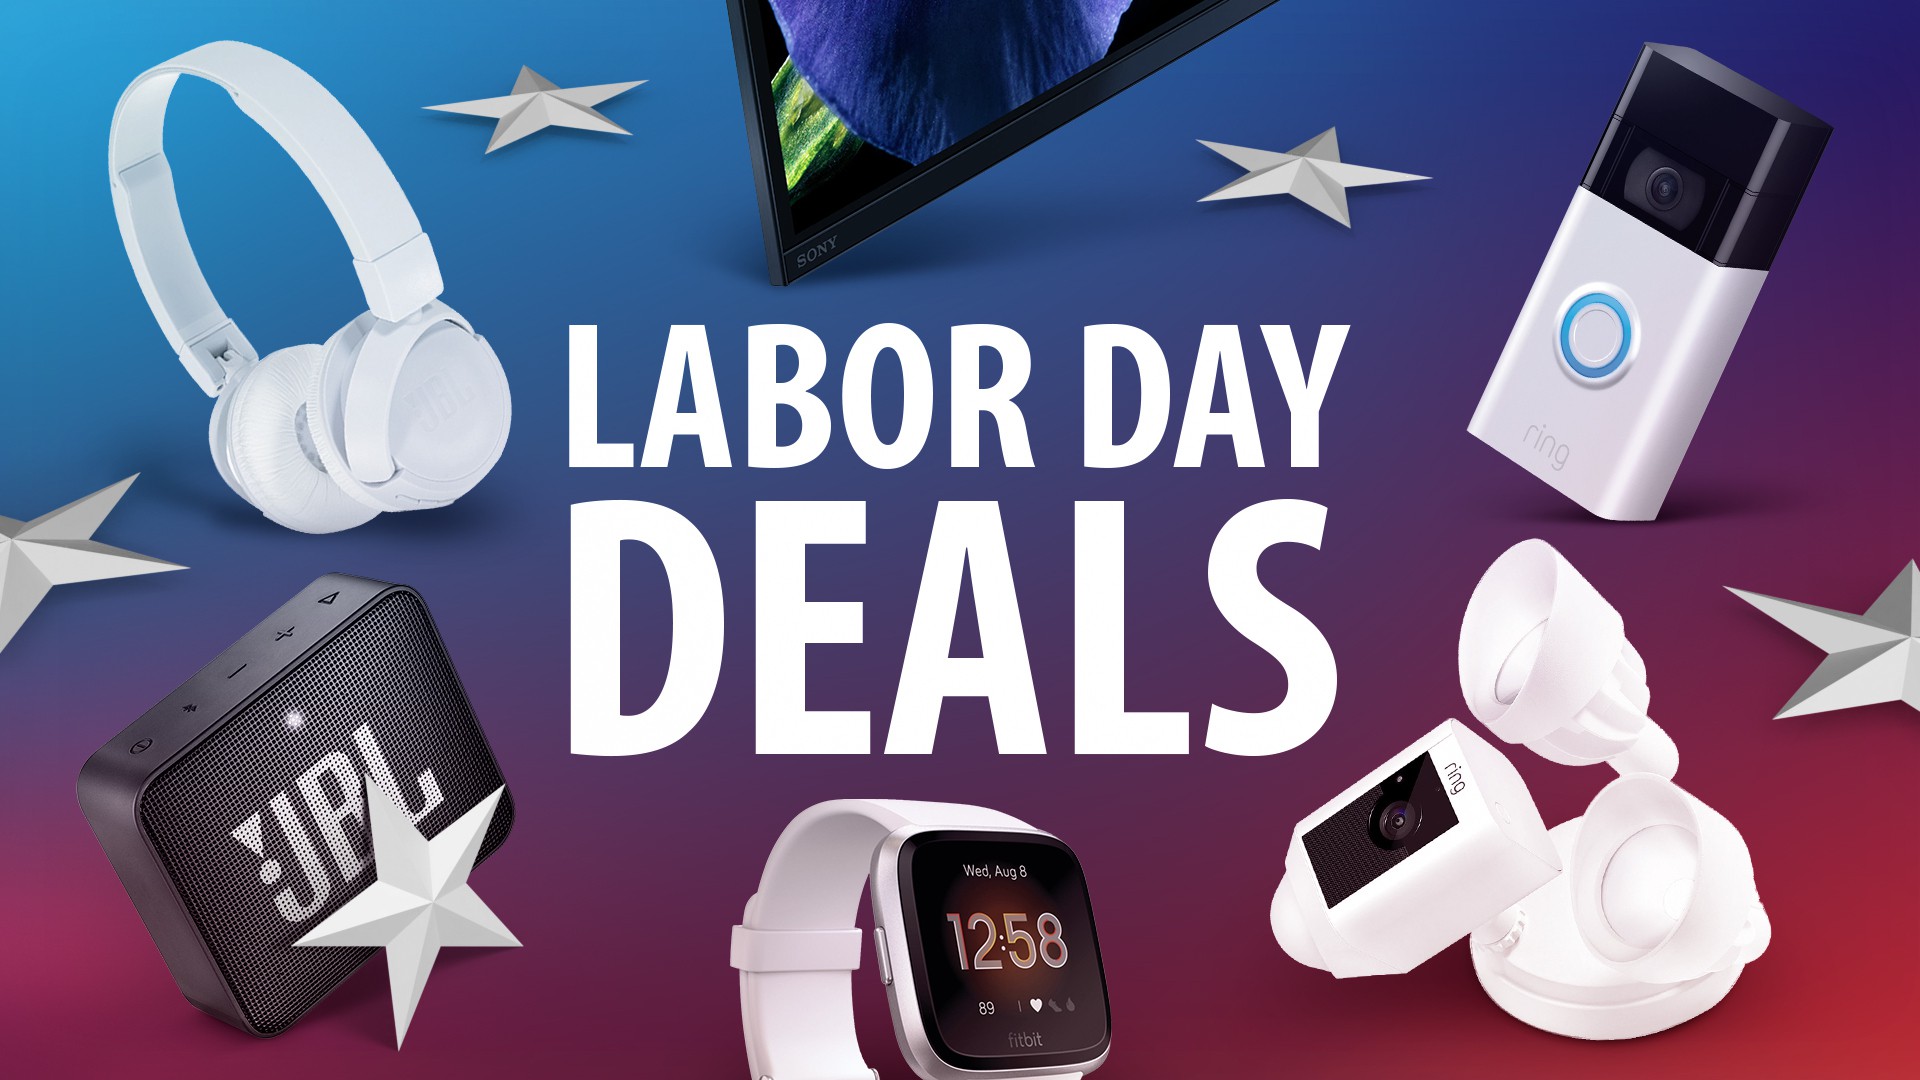 Labor Day Deals Save on HomePod, Beats Headphones, Bluetooth Speakers, Apple Accessories, and